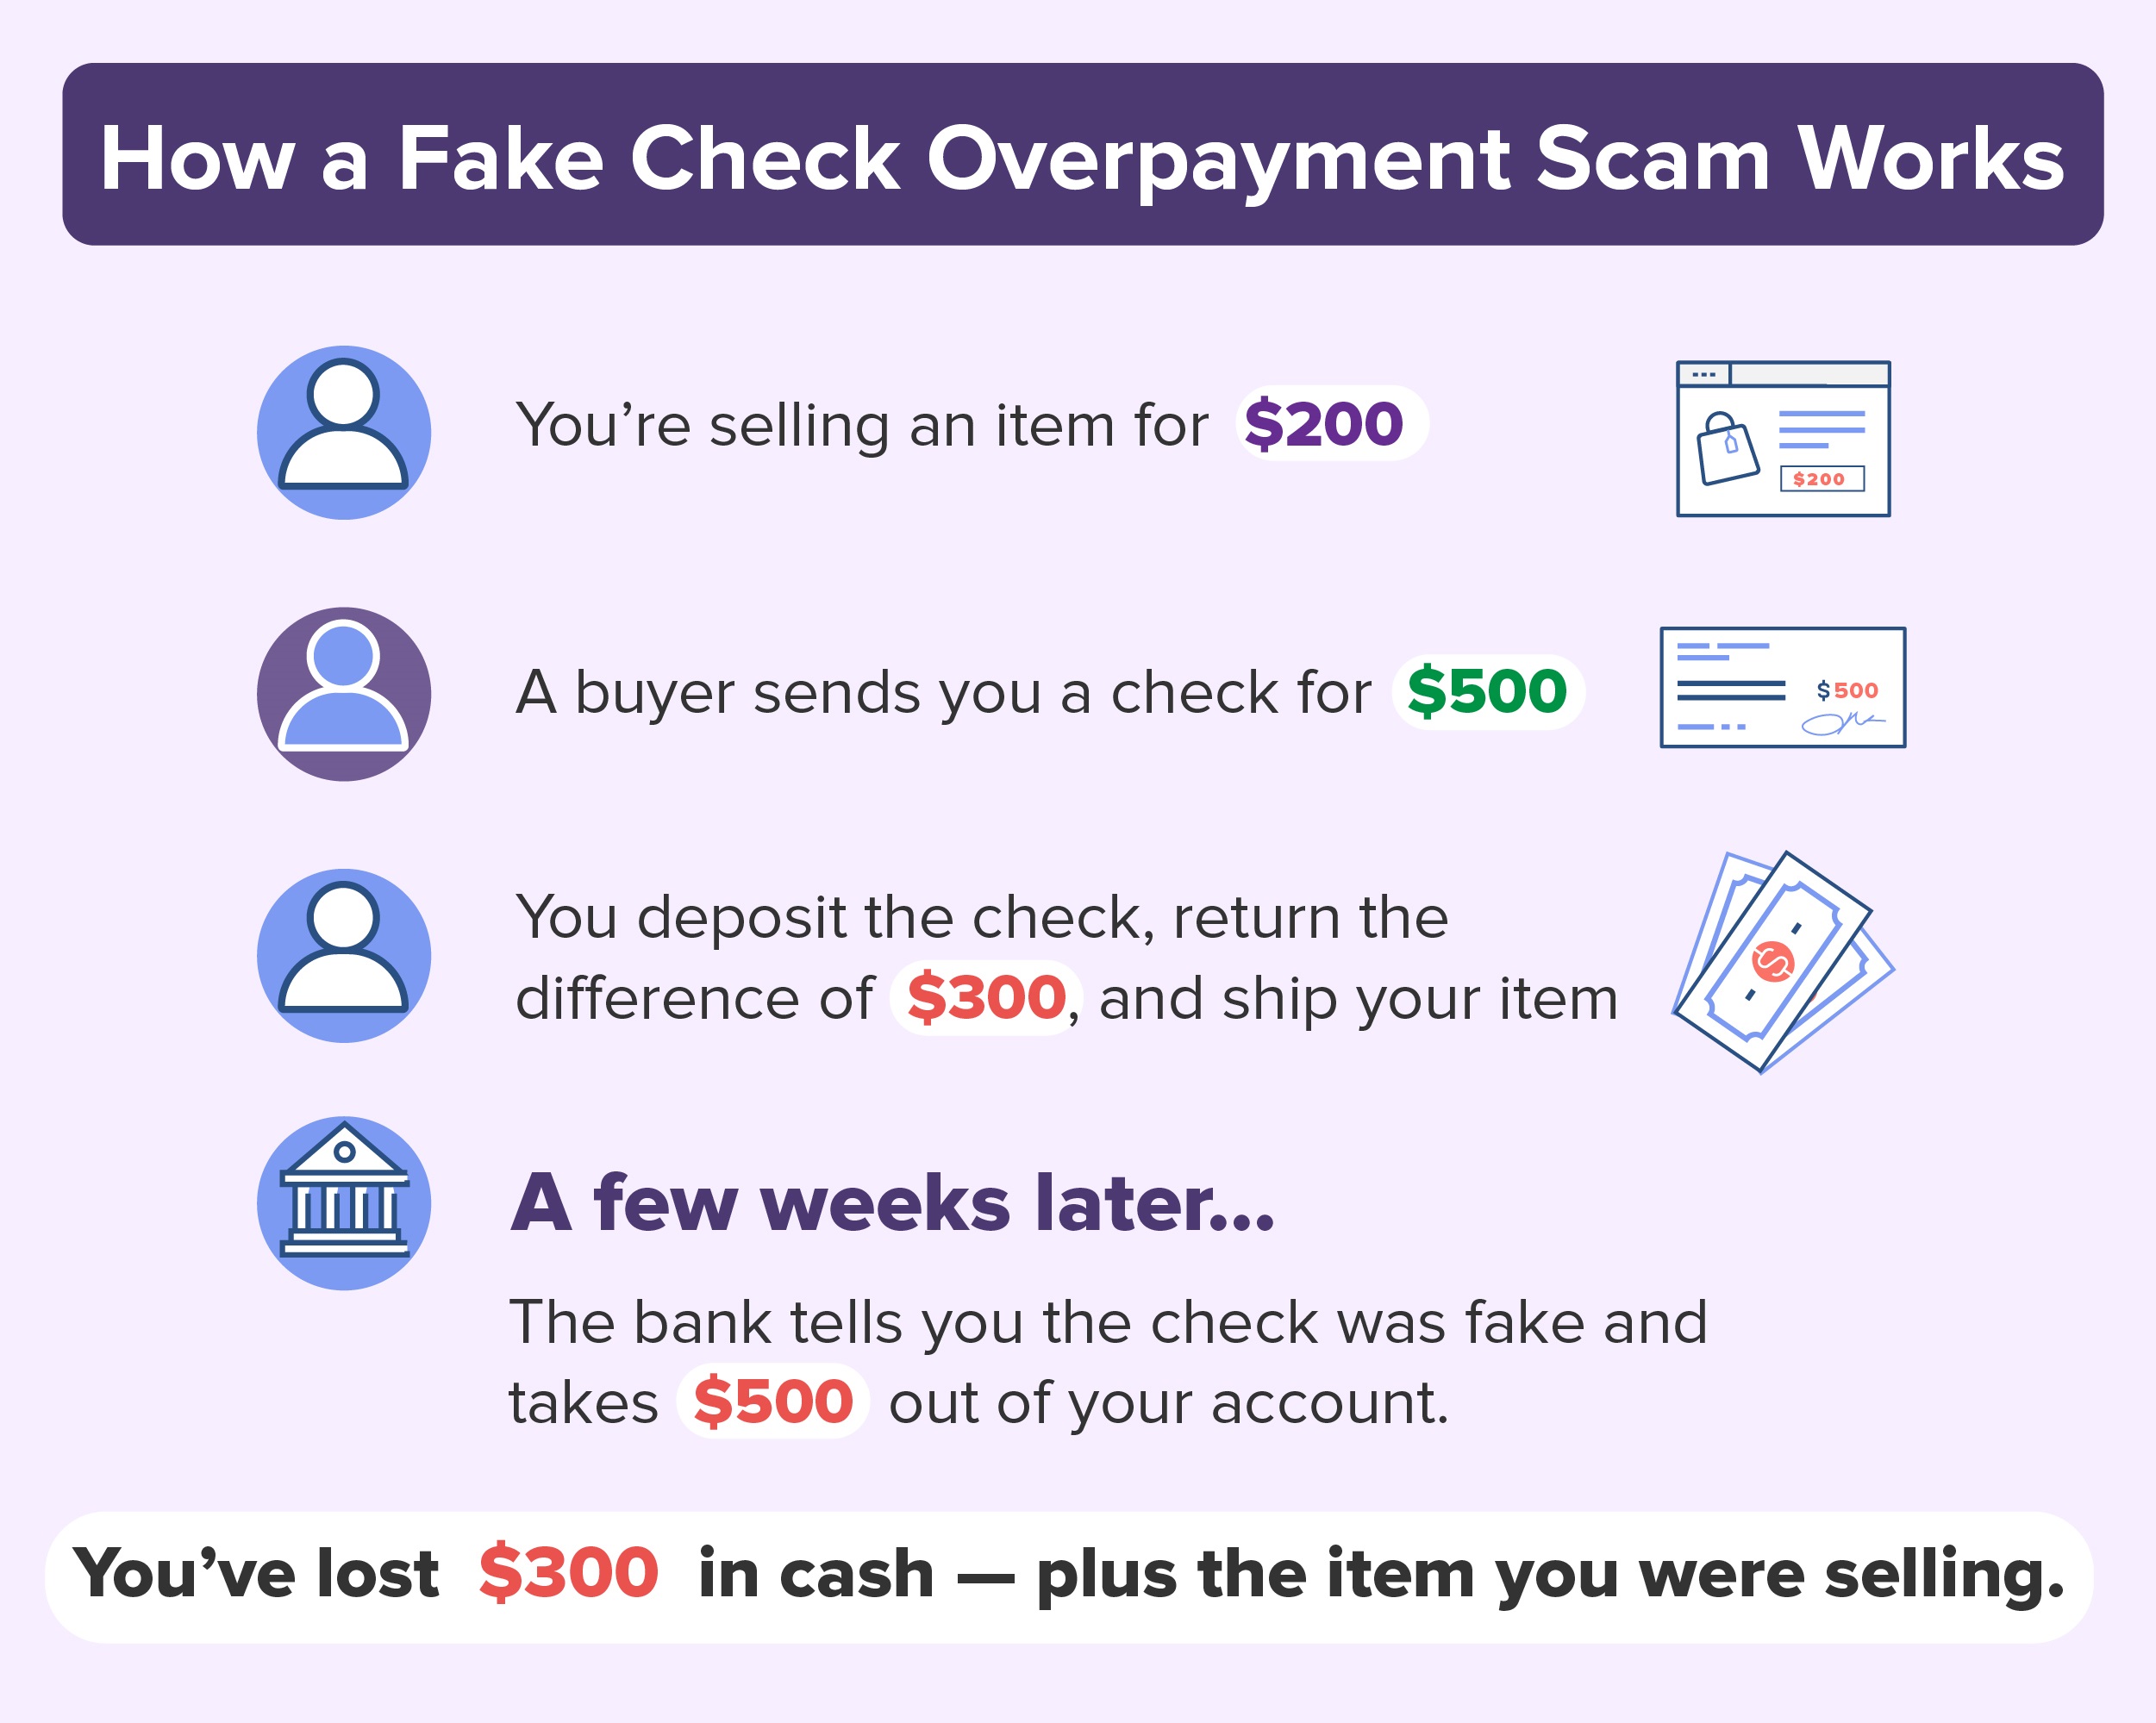 How To Avoid Scams When Playing Games Online